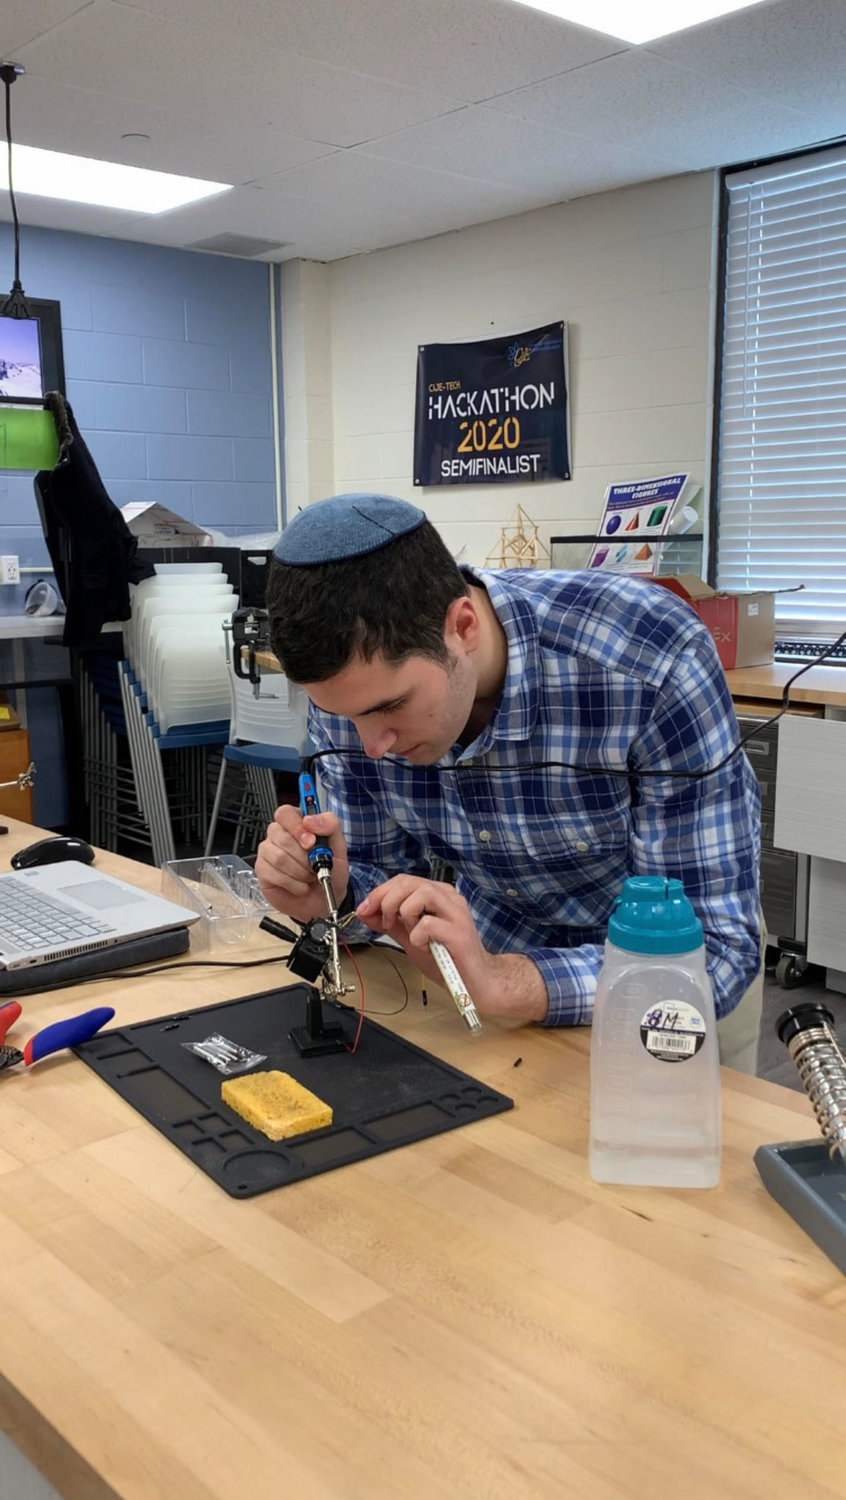 Hebrew Academy of Nassau County graduate Adin Moskowitz’s engineering finesse helped secure him a $1,000 scholarship to Cornell.